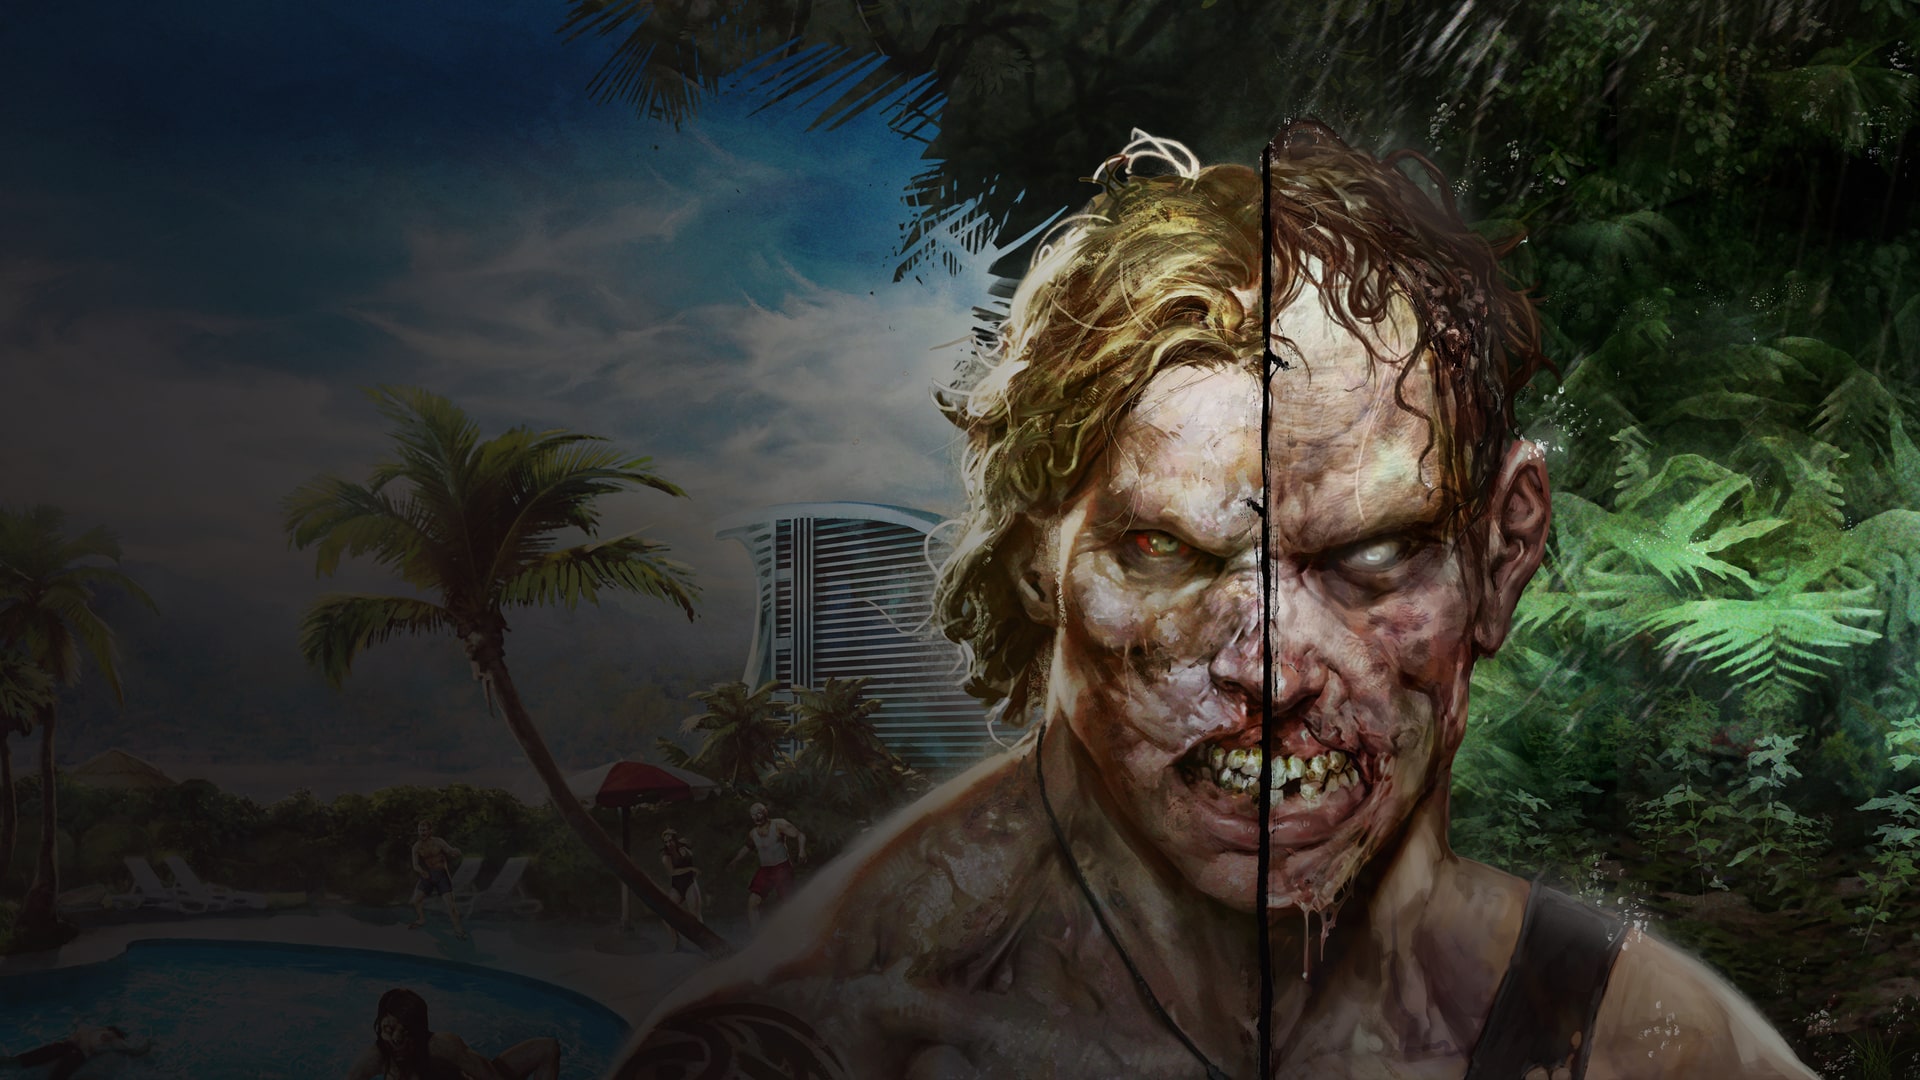 Buy Dead Island Definitive Collection from the Humble Store